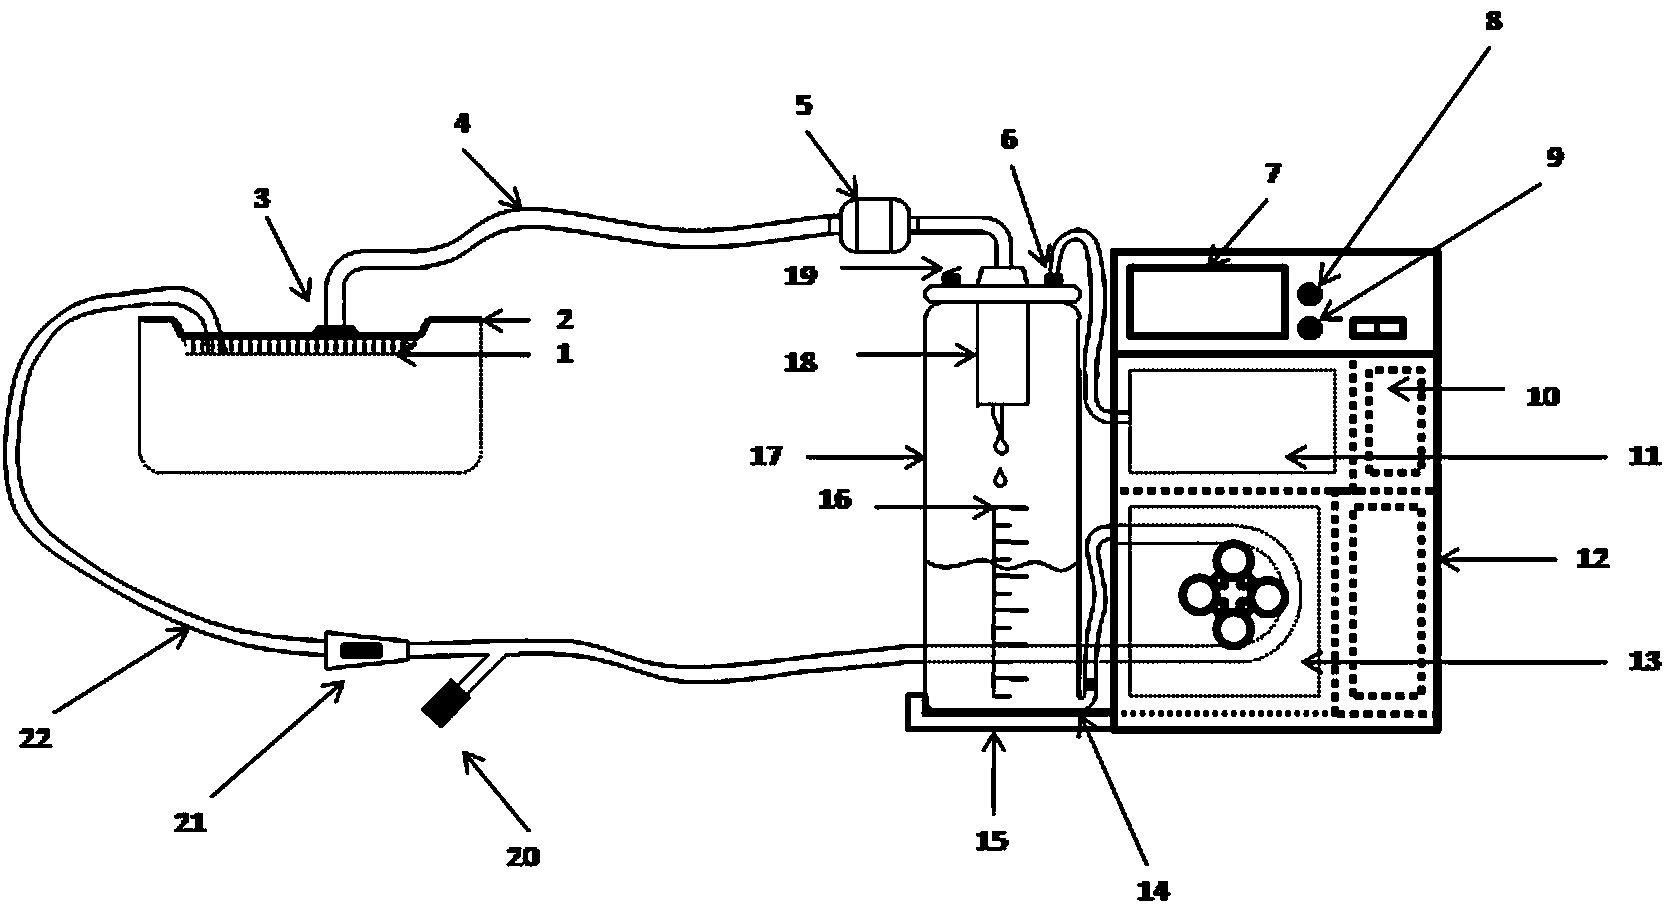 Portable wound surface protection and treatment system having sealed negative-pressure drainage function and washing function